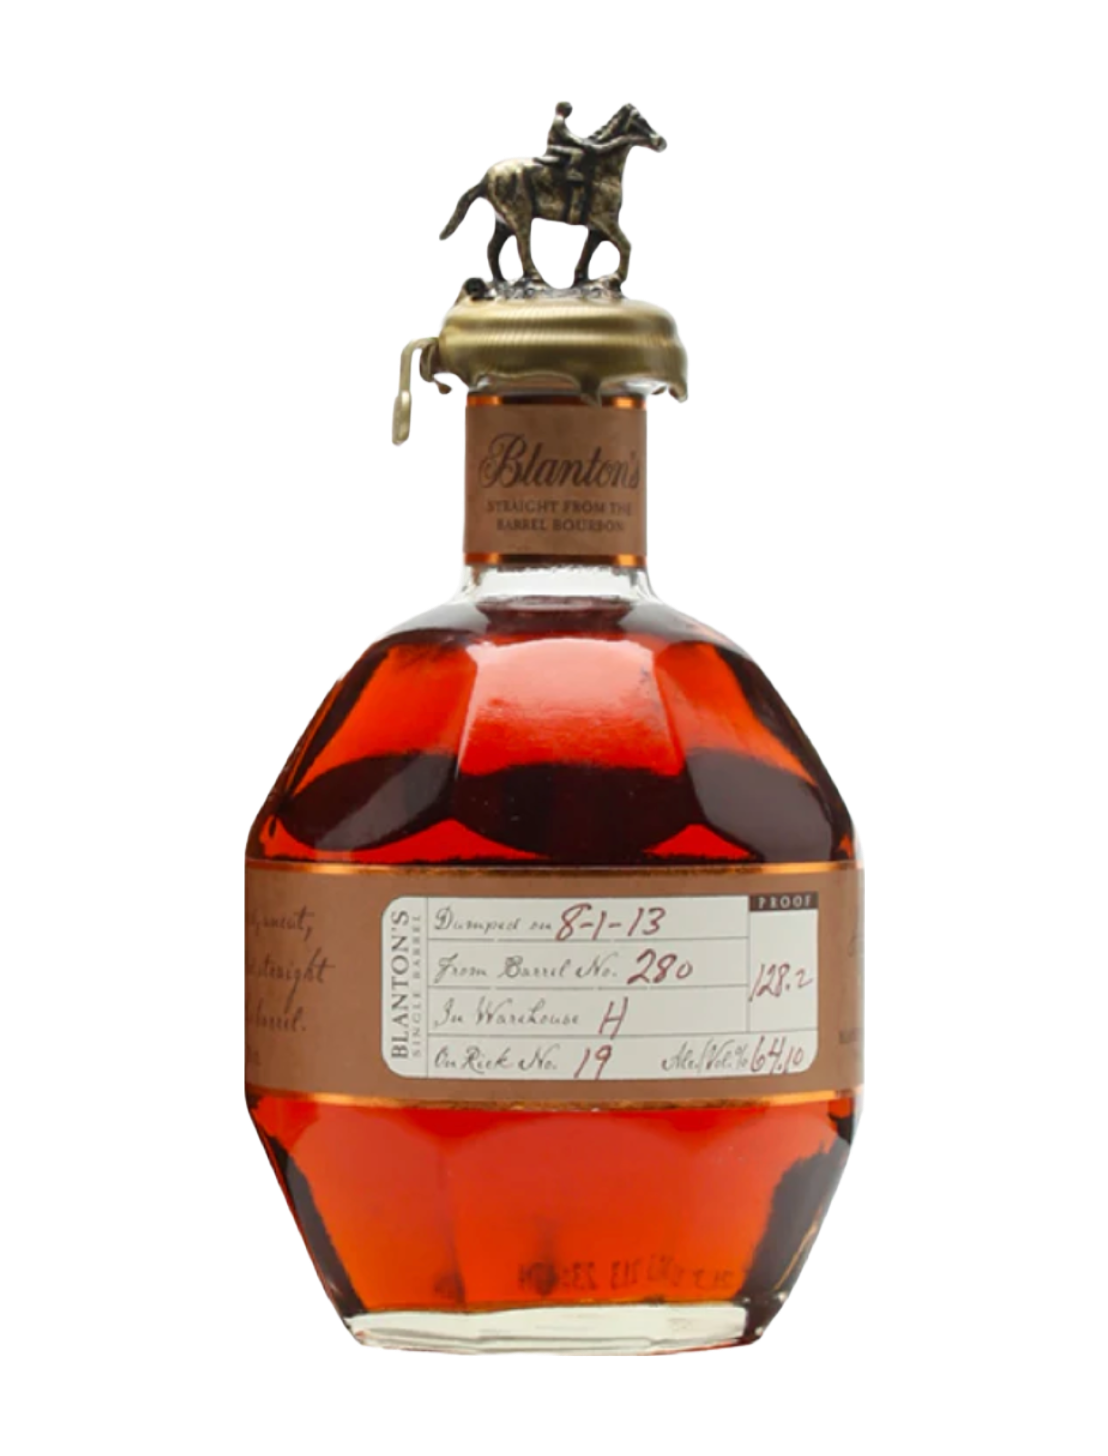 An elegant bottle of Blanton's Straight From The Barrel Single Barrel Bourbon in front of a plain white background